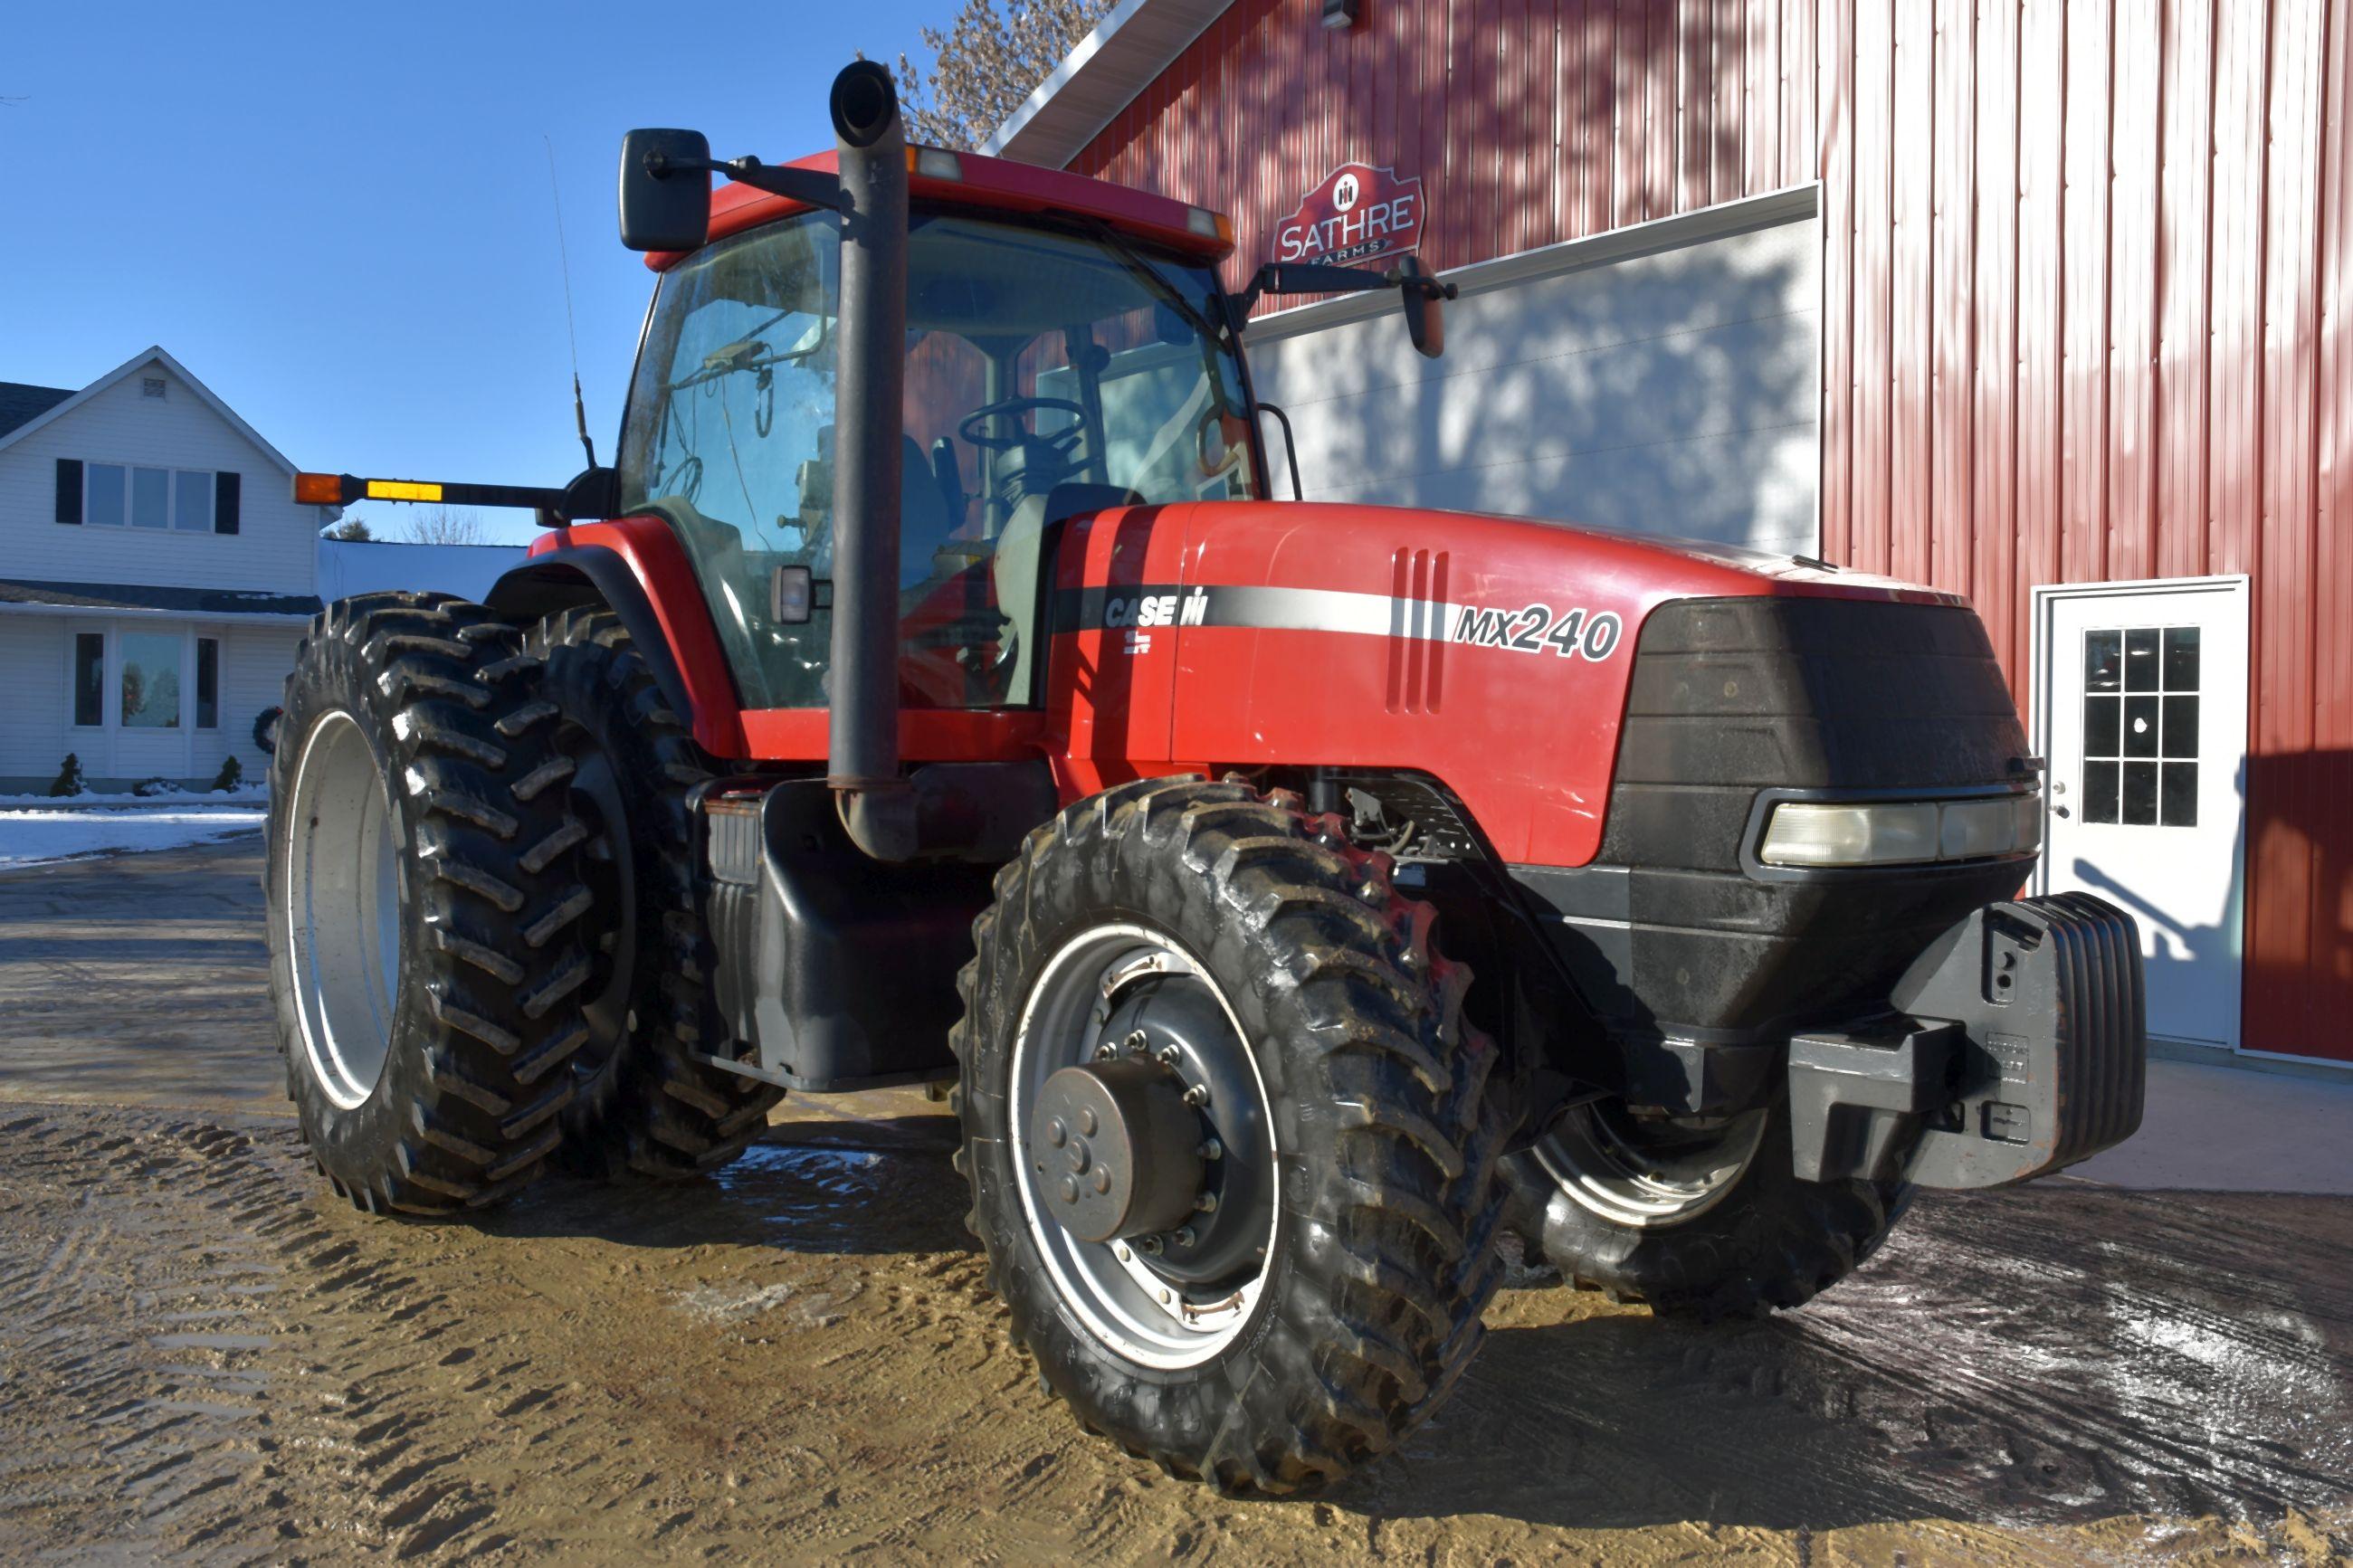 2001 Case IH MX240 Magnum MFWD, 3518 Hours, 480/80R46 Duals At 85%, 380/85R34 Fronts, 3 Hydraulics,